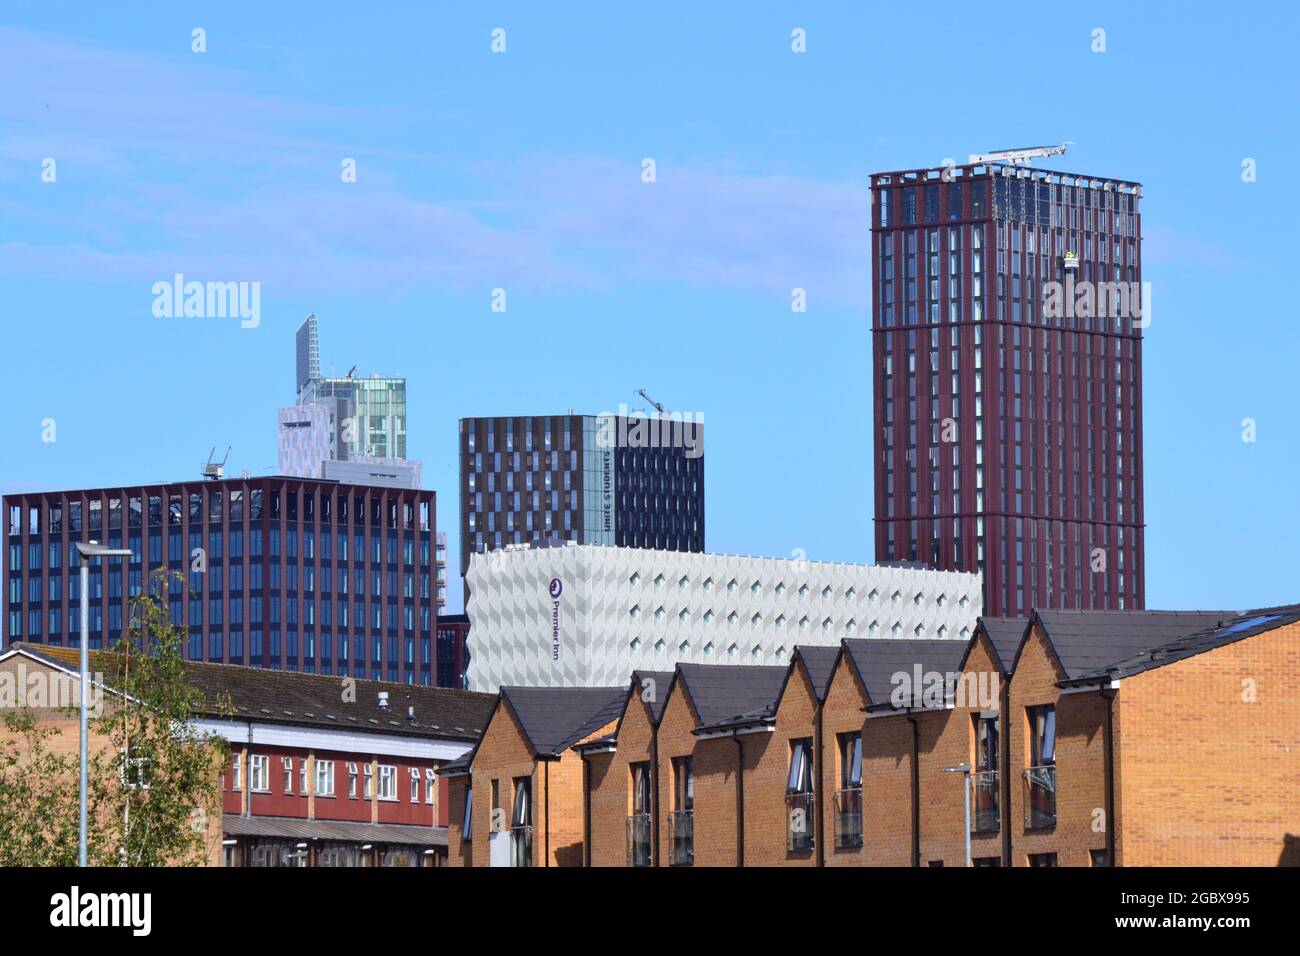 New skyscrapers or high rise buildings, with new houses in the foreground, in central Manchester, England, United Kingdom Stock Photo